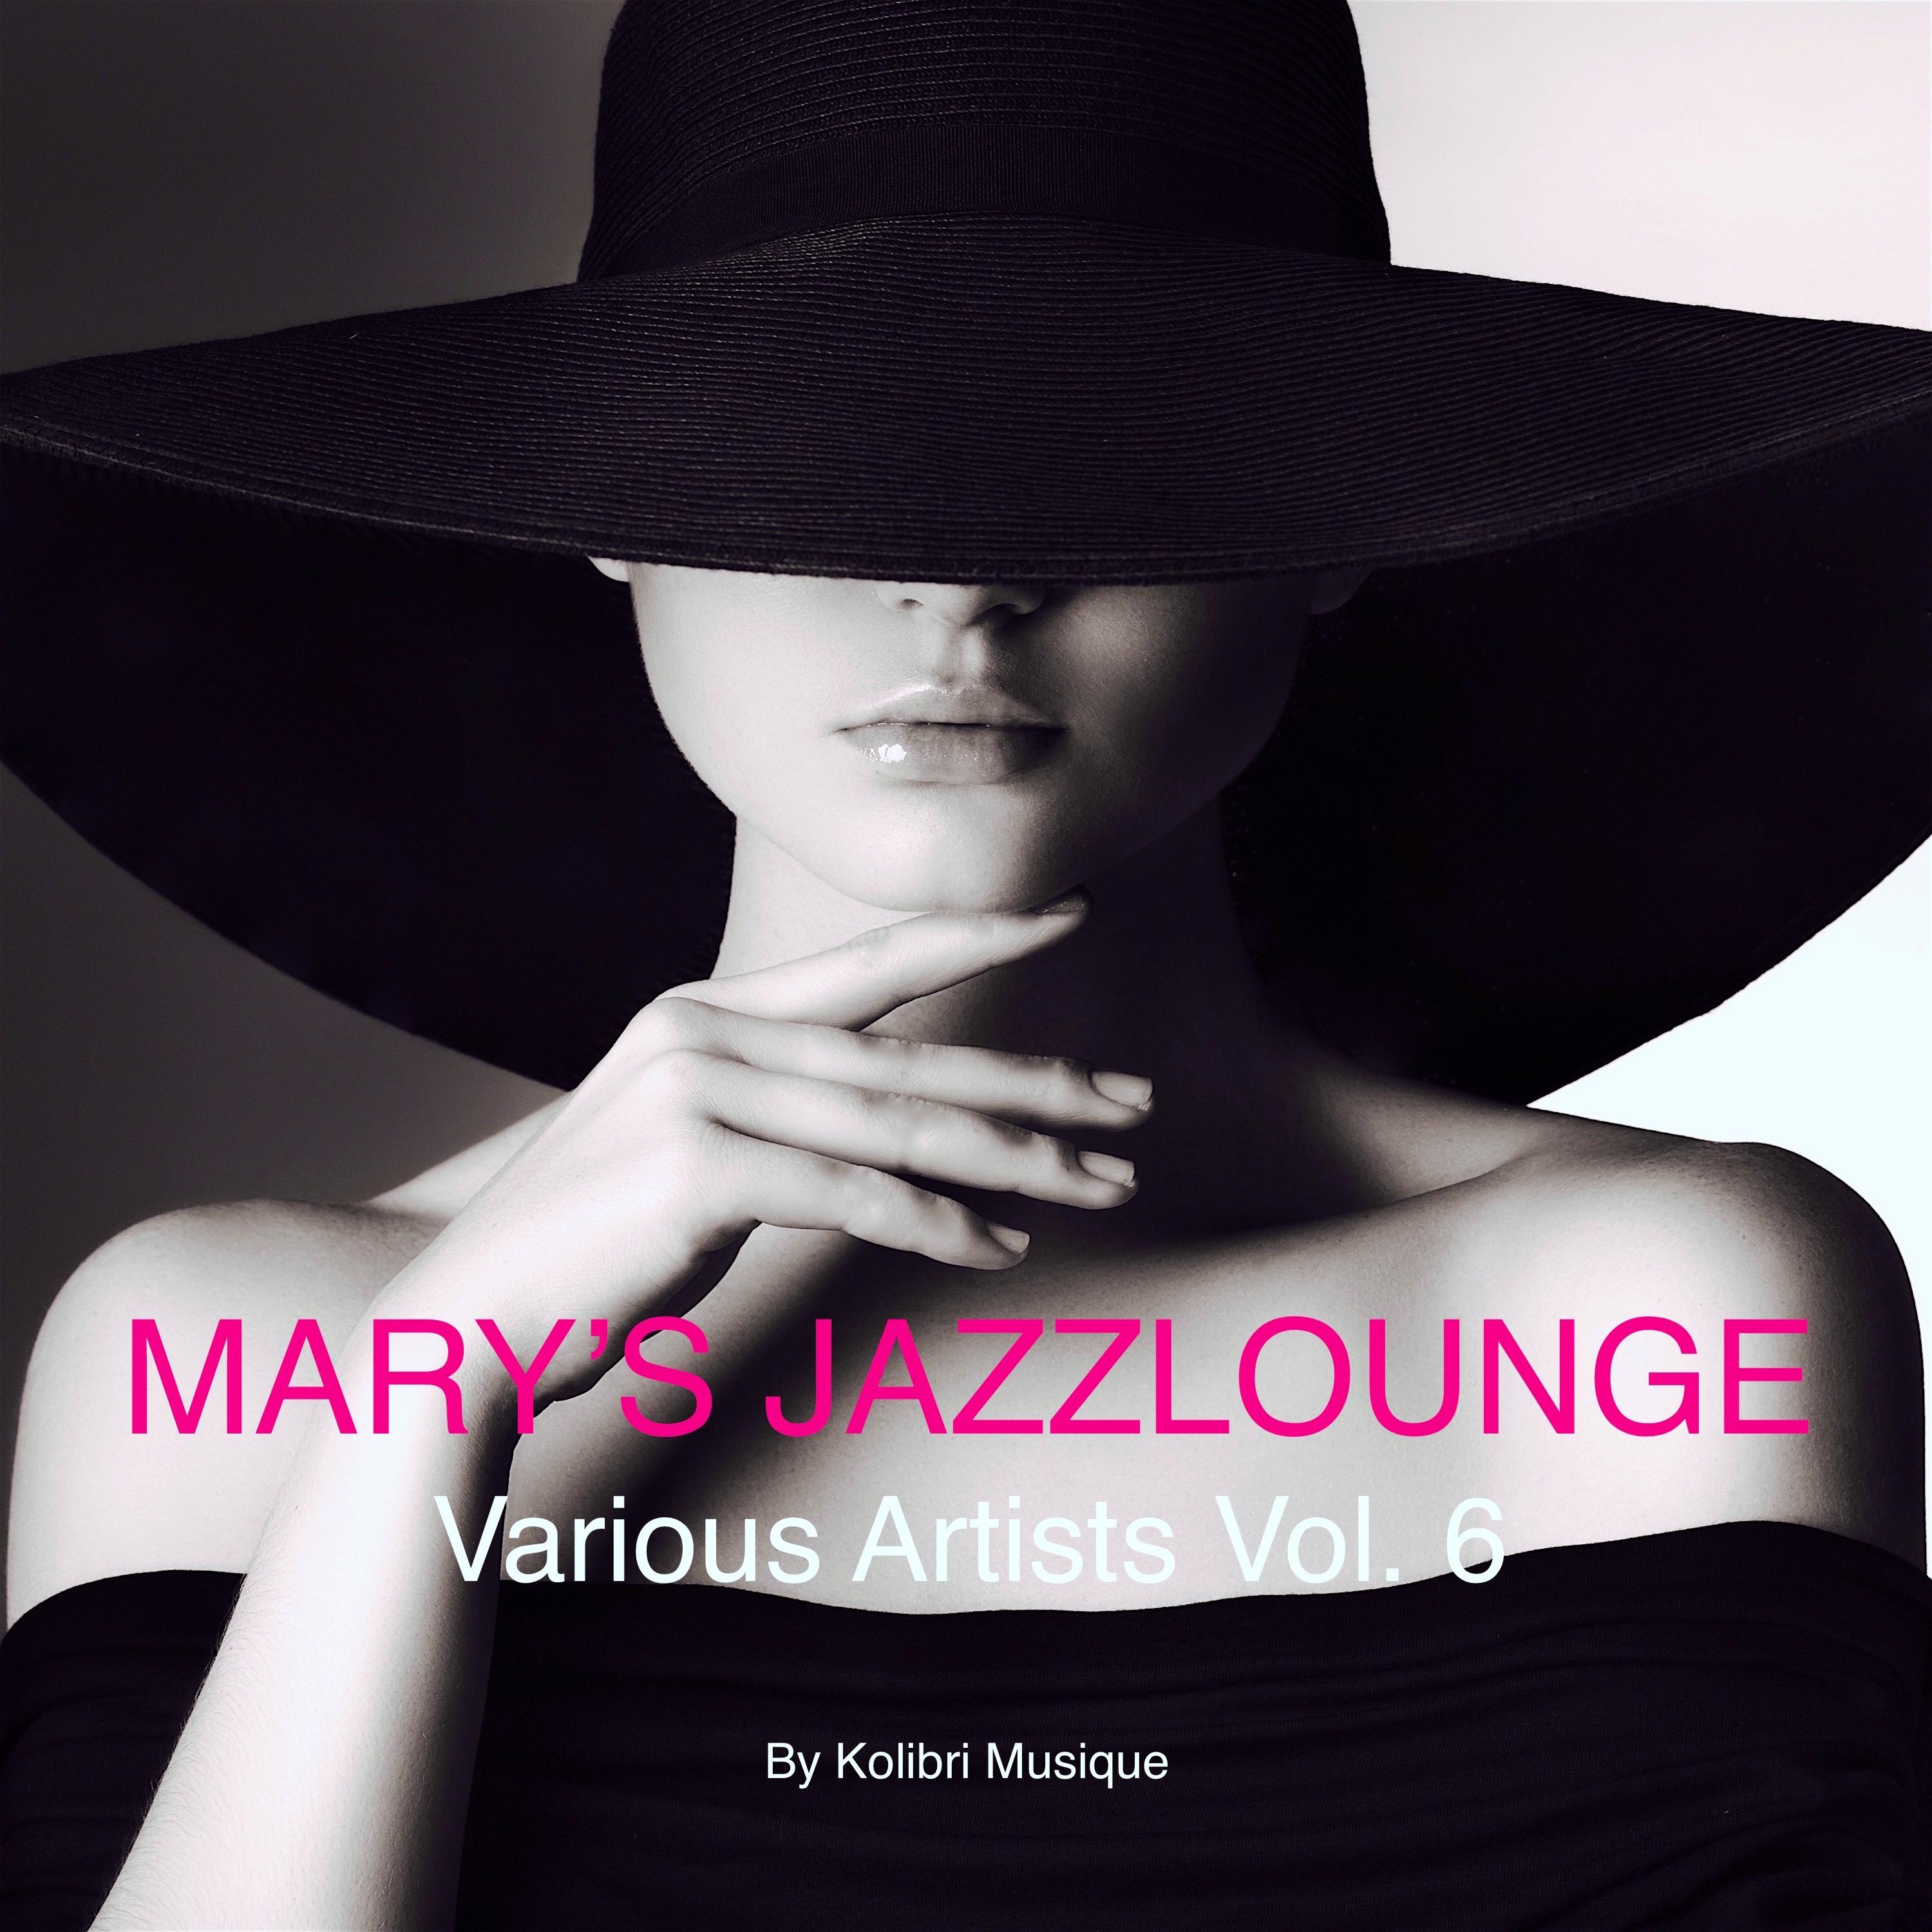 Mary's Jazzlounge Various Artists, Vol. 6 - Presented by Kolibri Musique